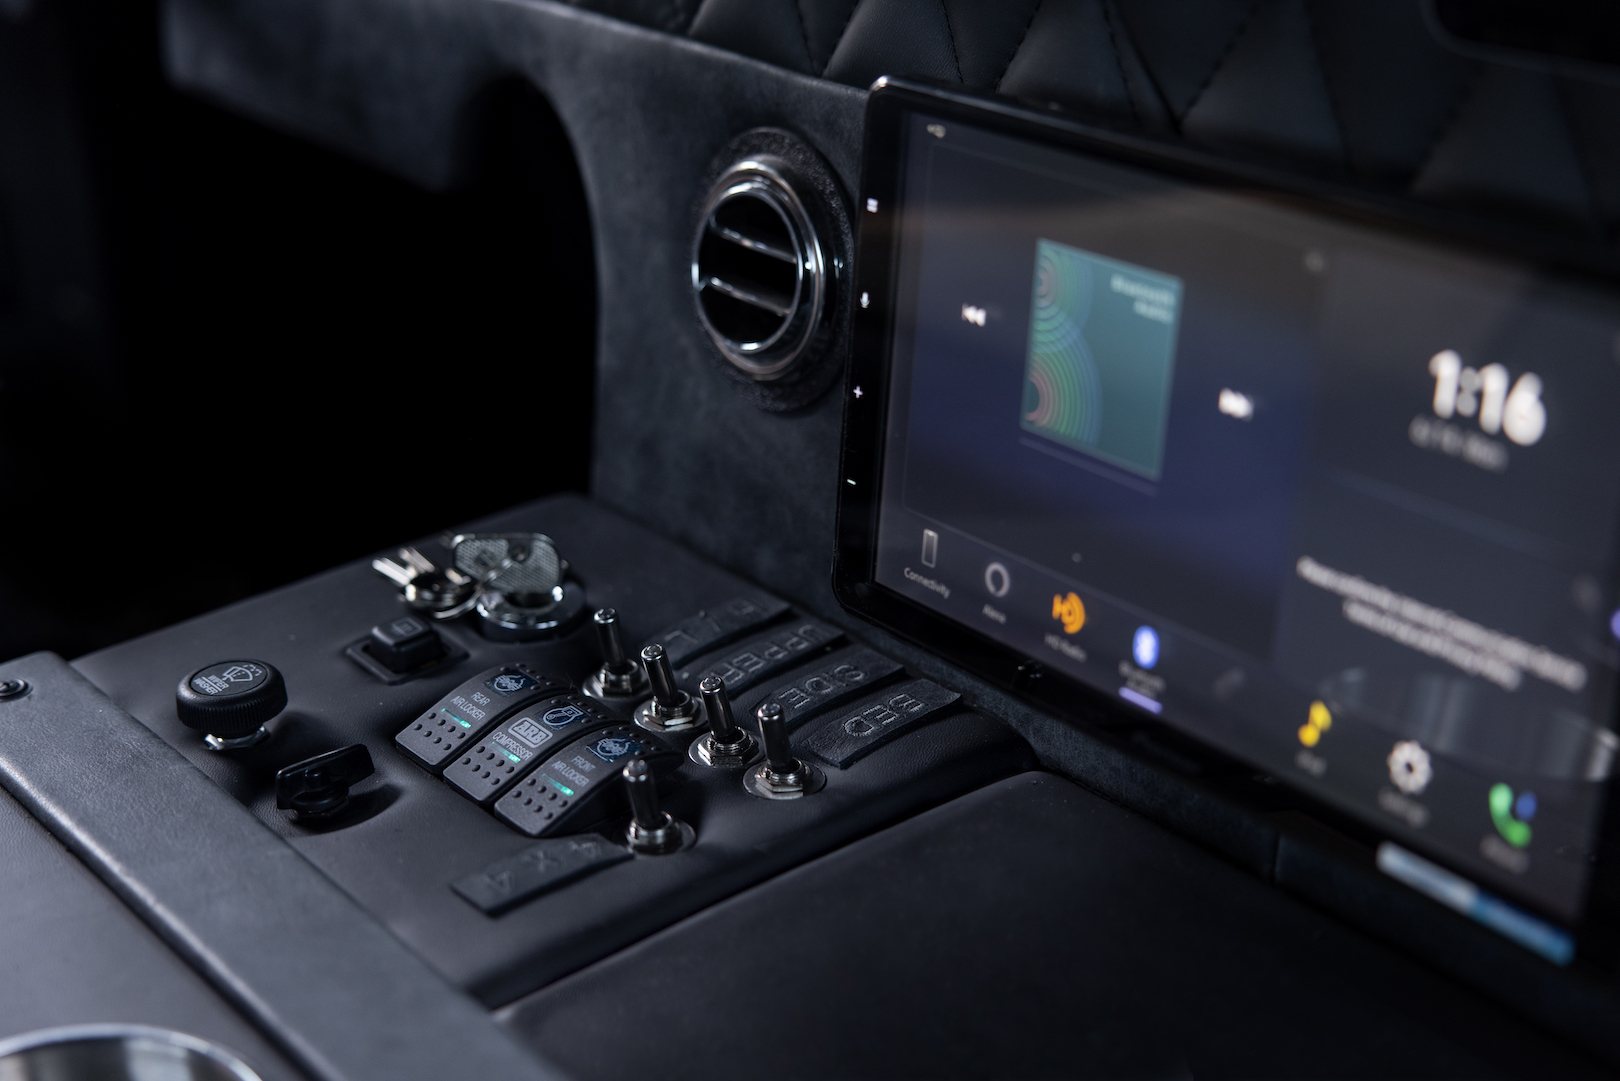 Center console of the "Cyber-Hummer" H1 EV conversion